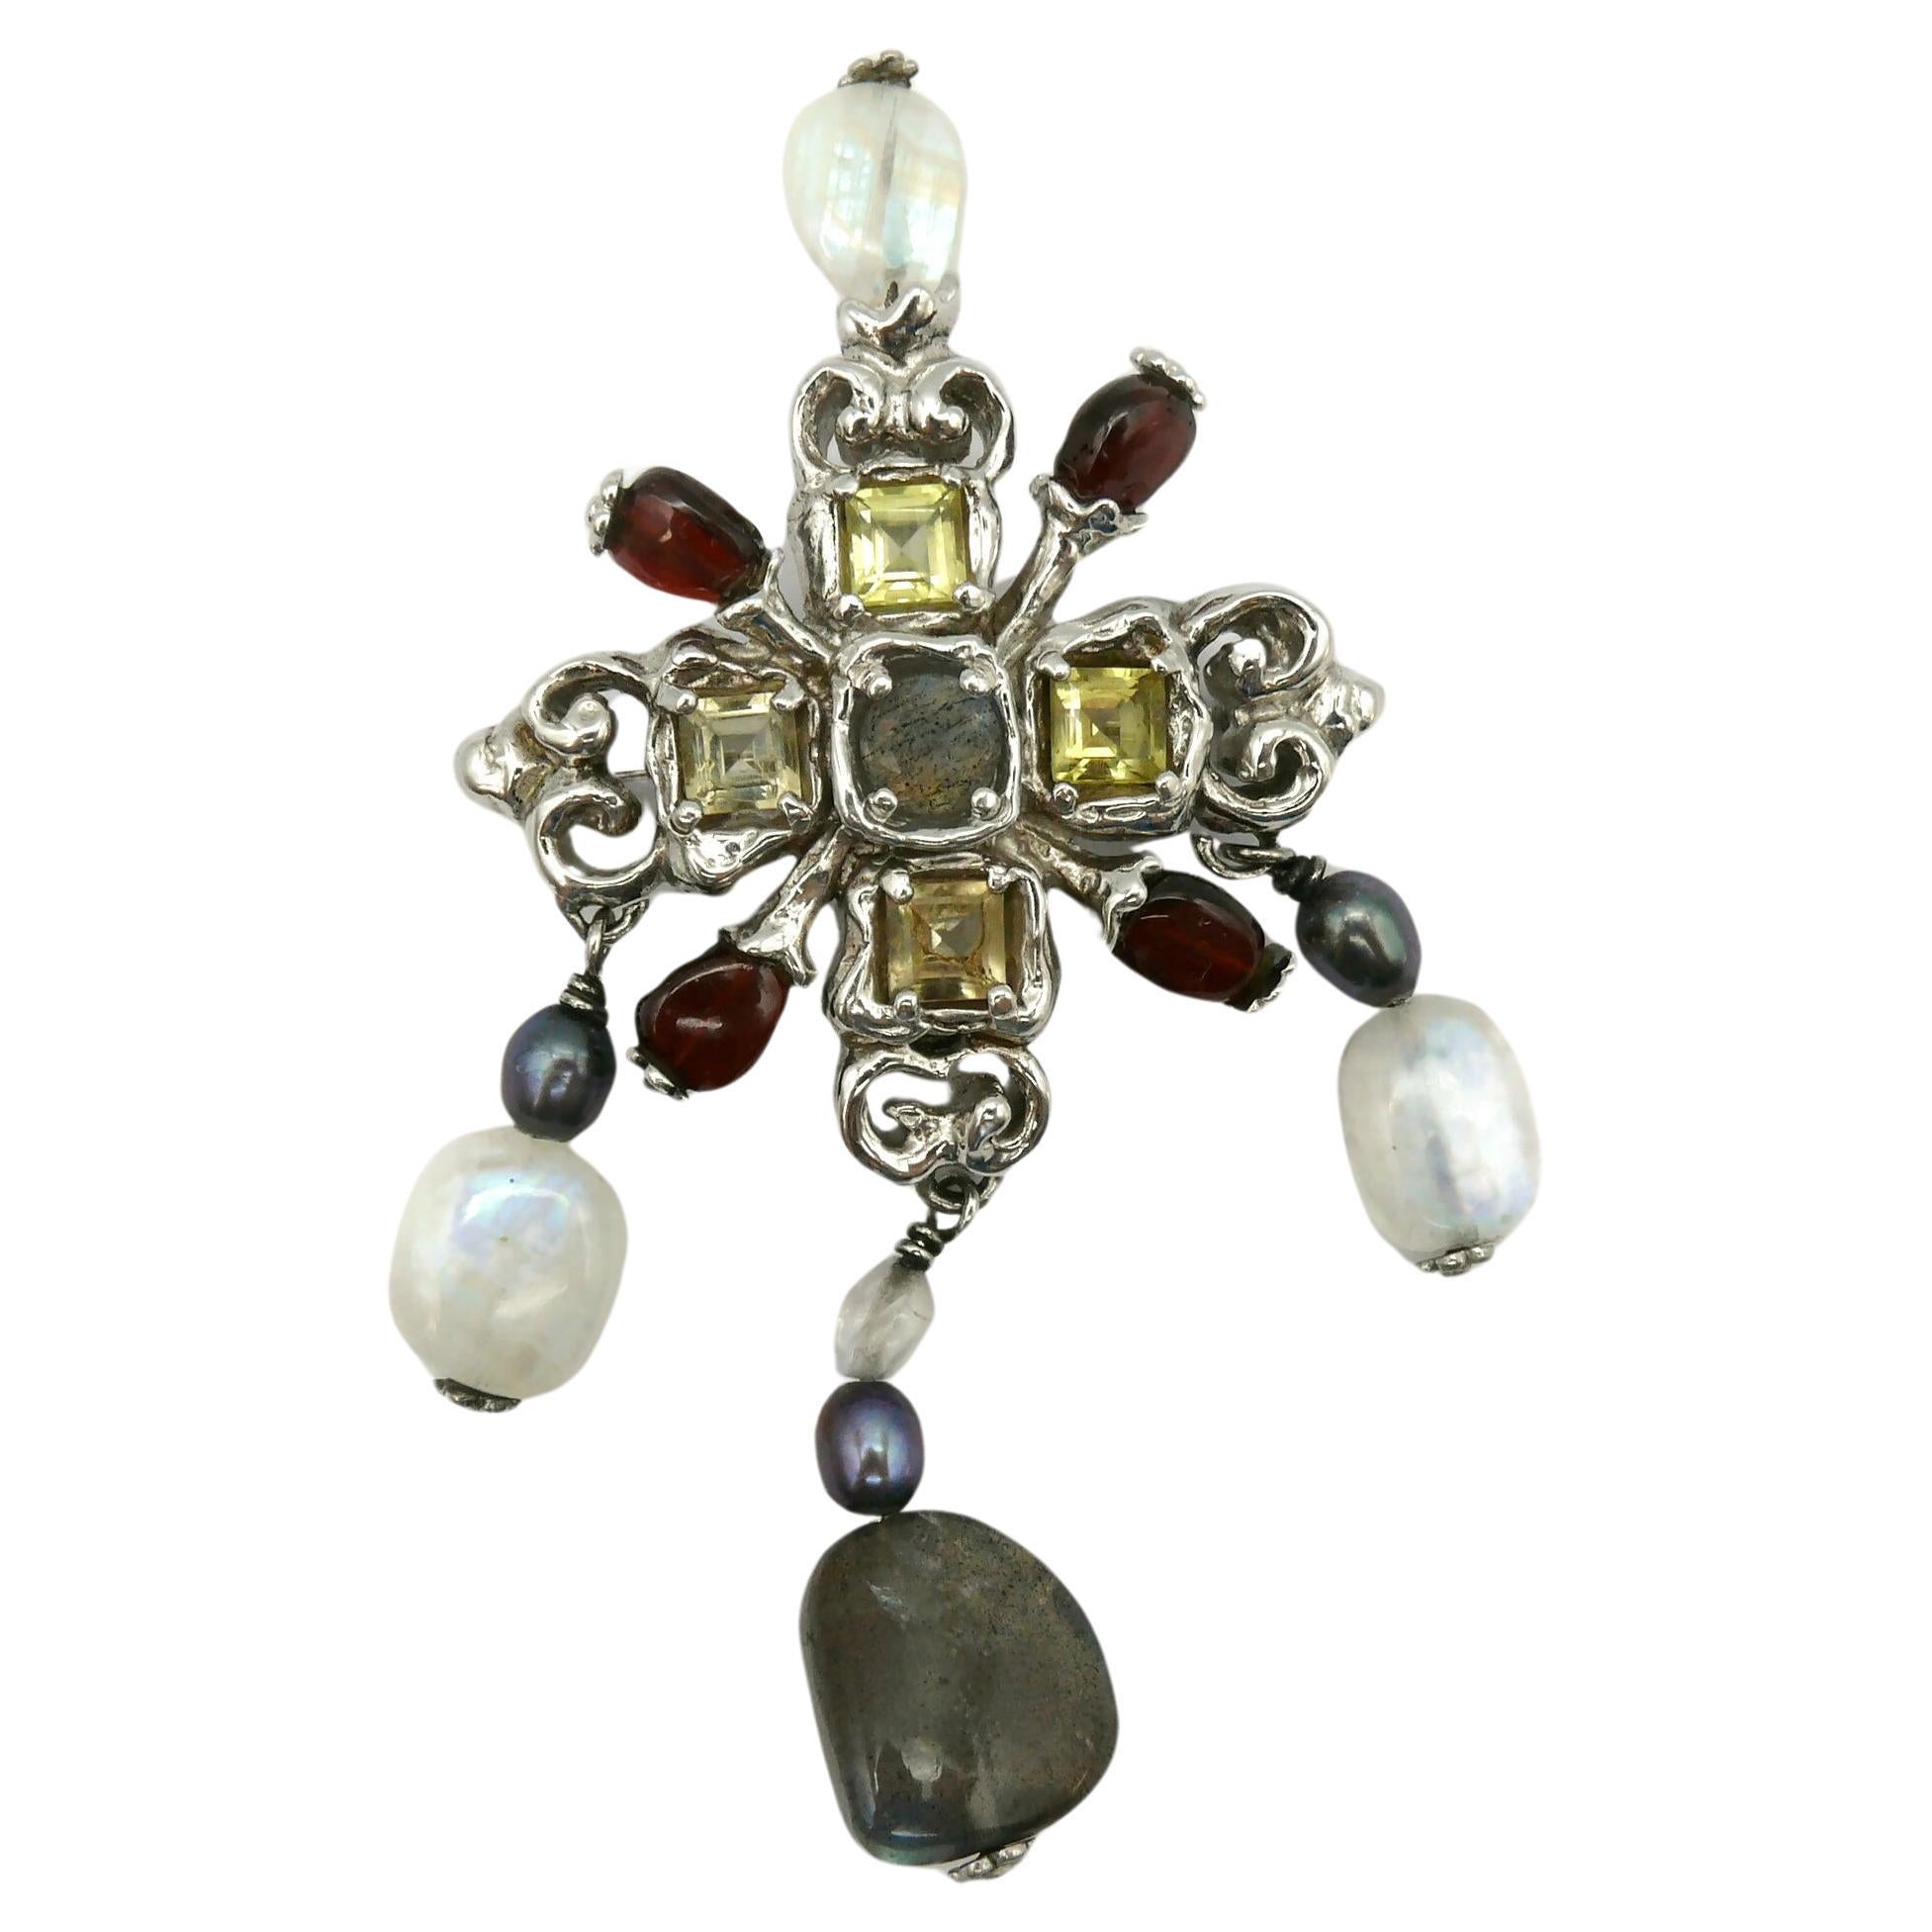 CHRISTIAN LACROIX Vintage Jewelled Sterling Silver Cross Brooch Pendant